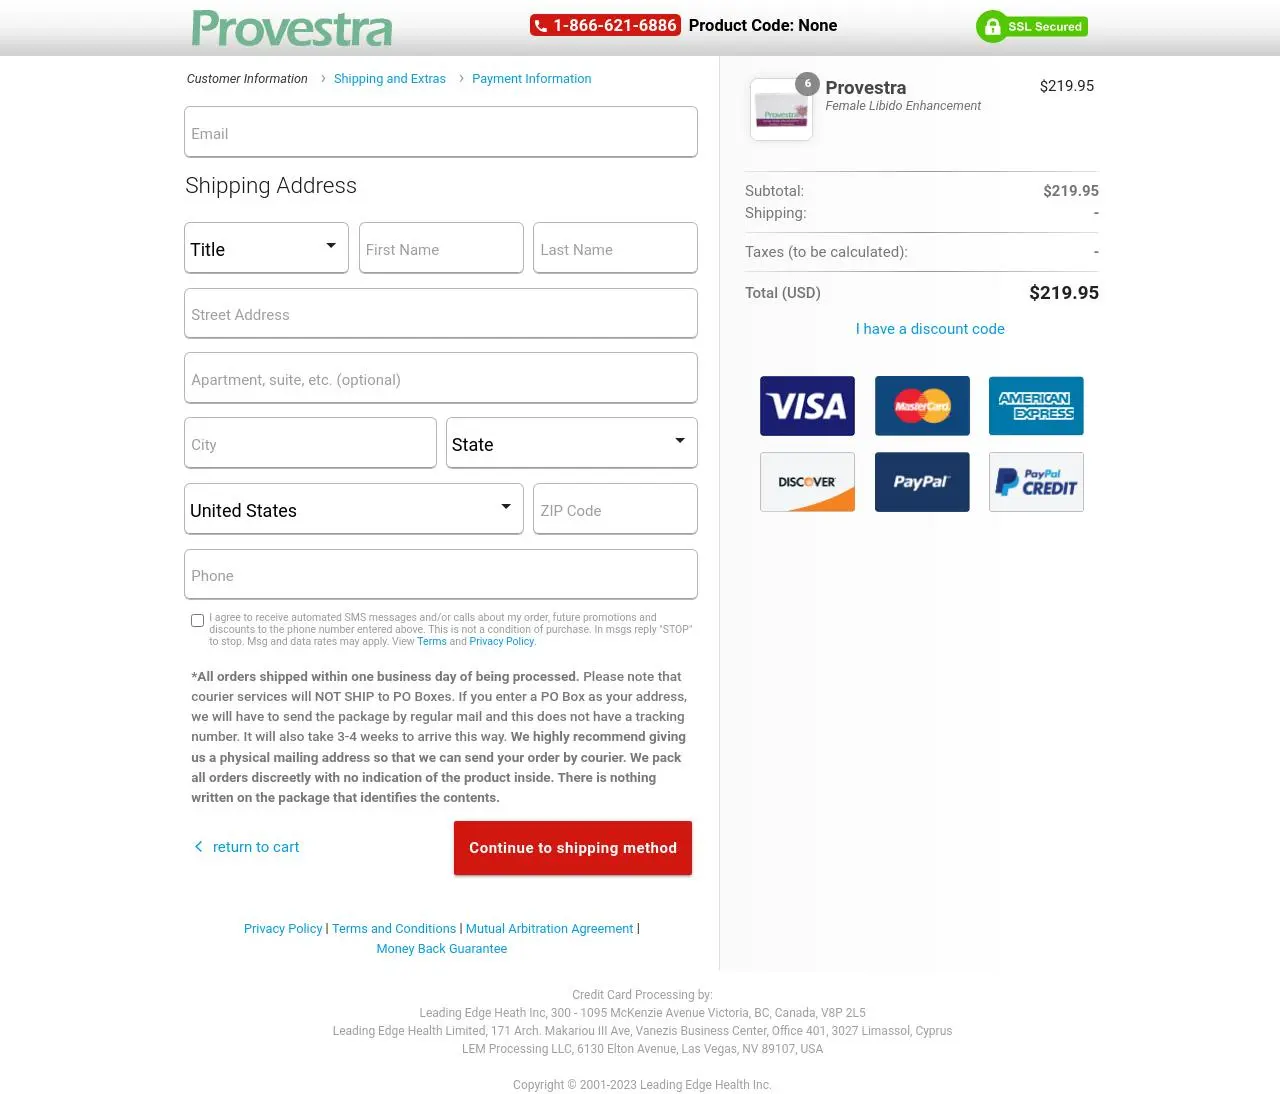 Provestra - Order Page